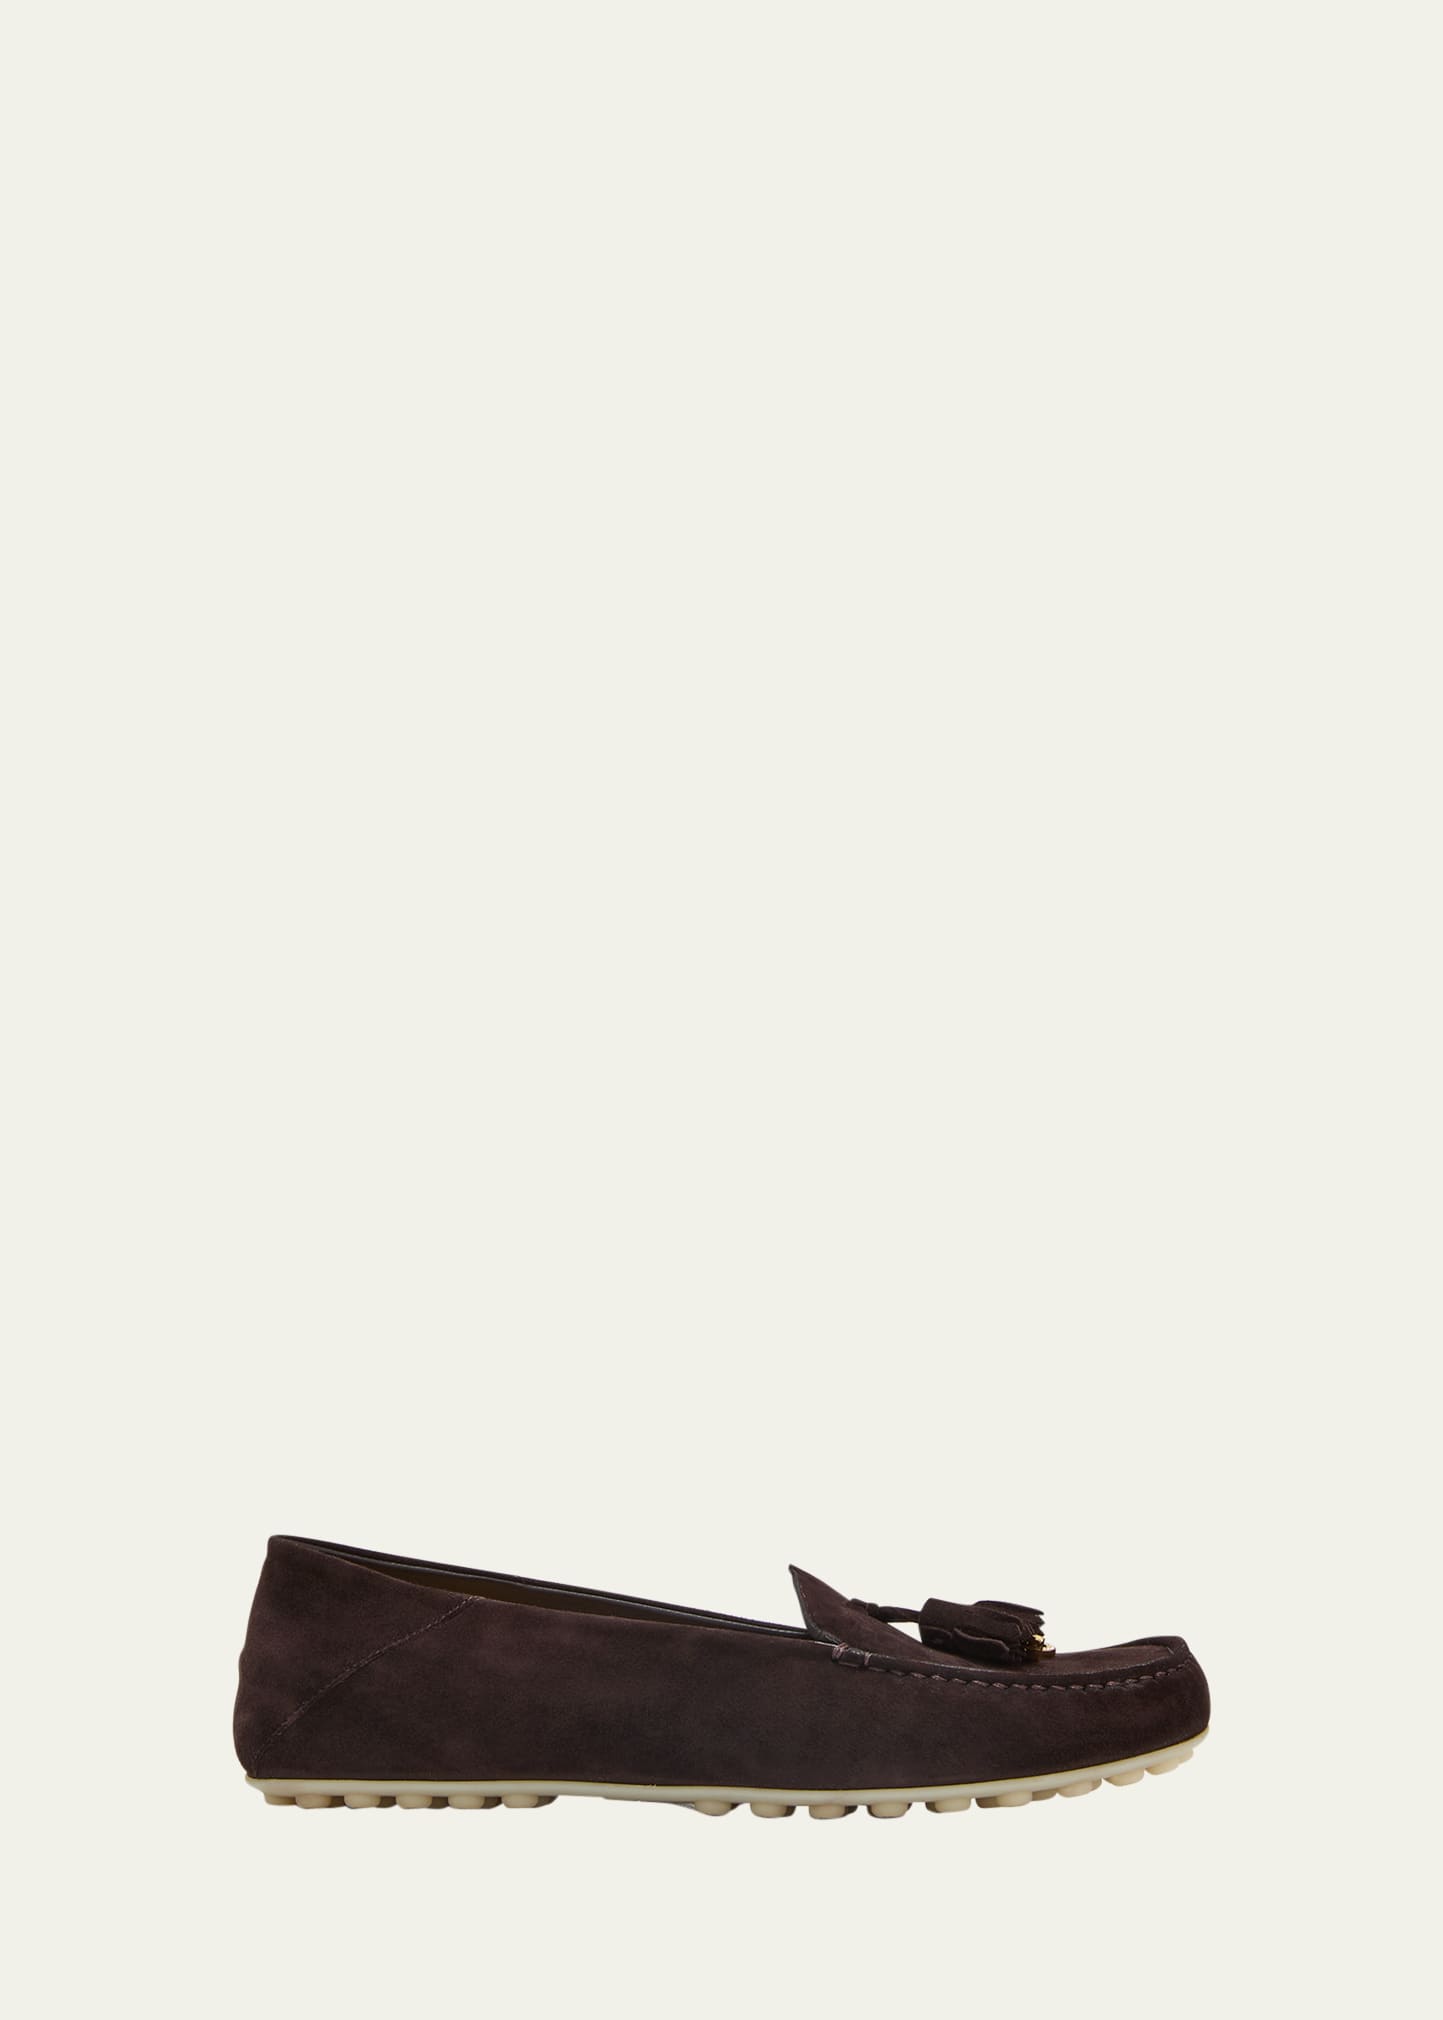 Loro Piana Suede Tassel Moccasin Loafers In H026 Chocolate